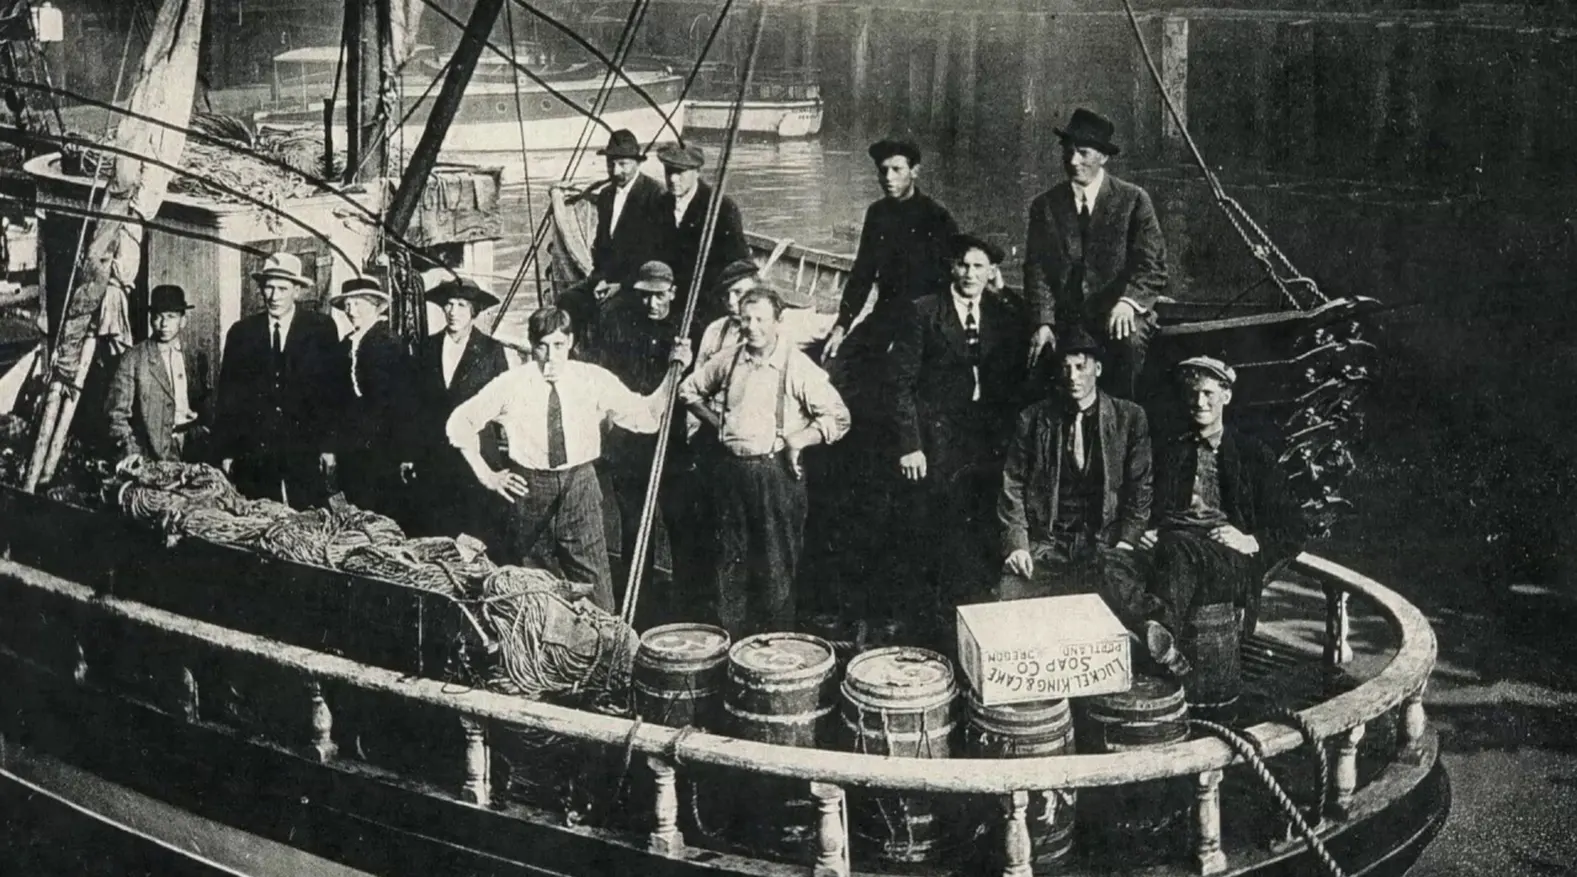 The Crew of the Vansee early 1900